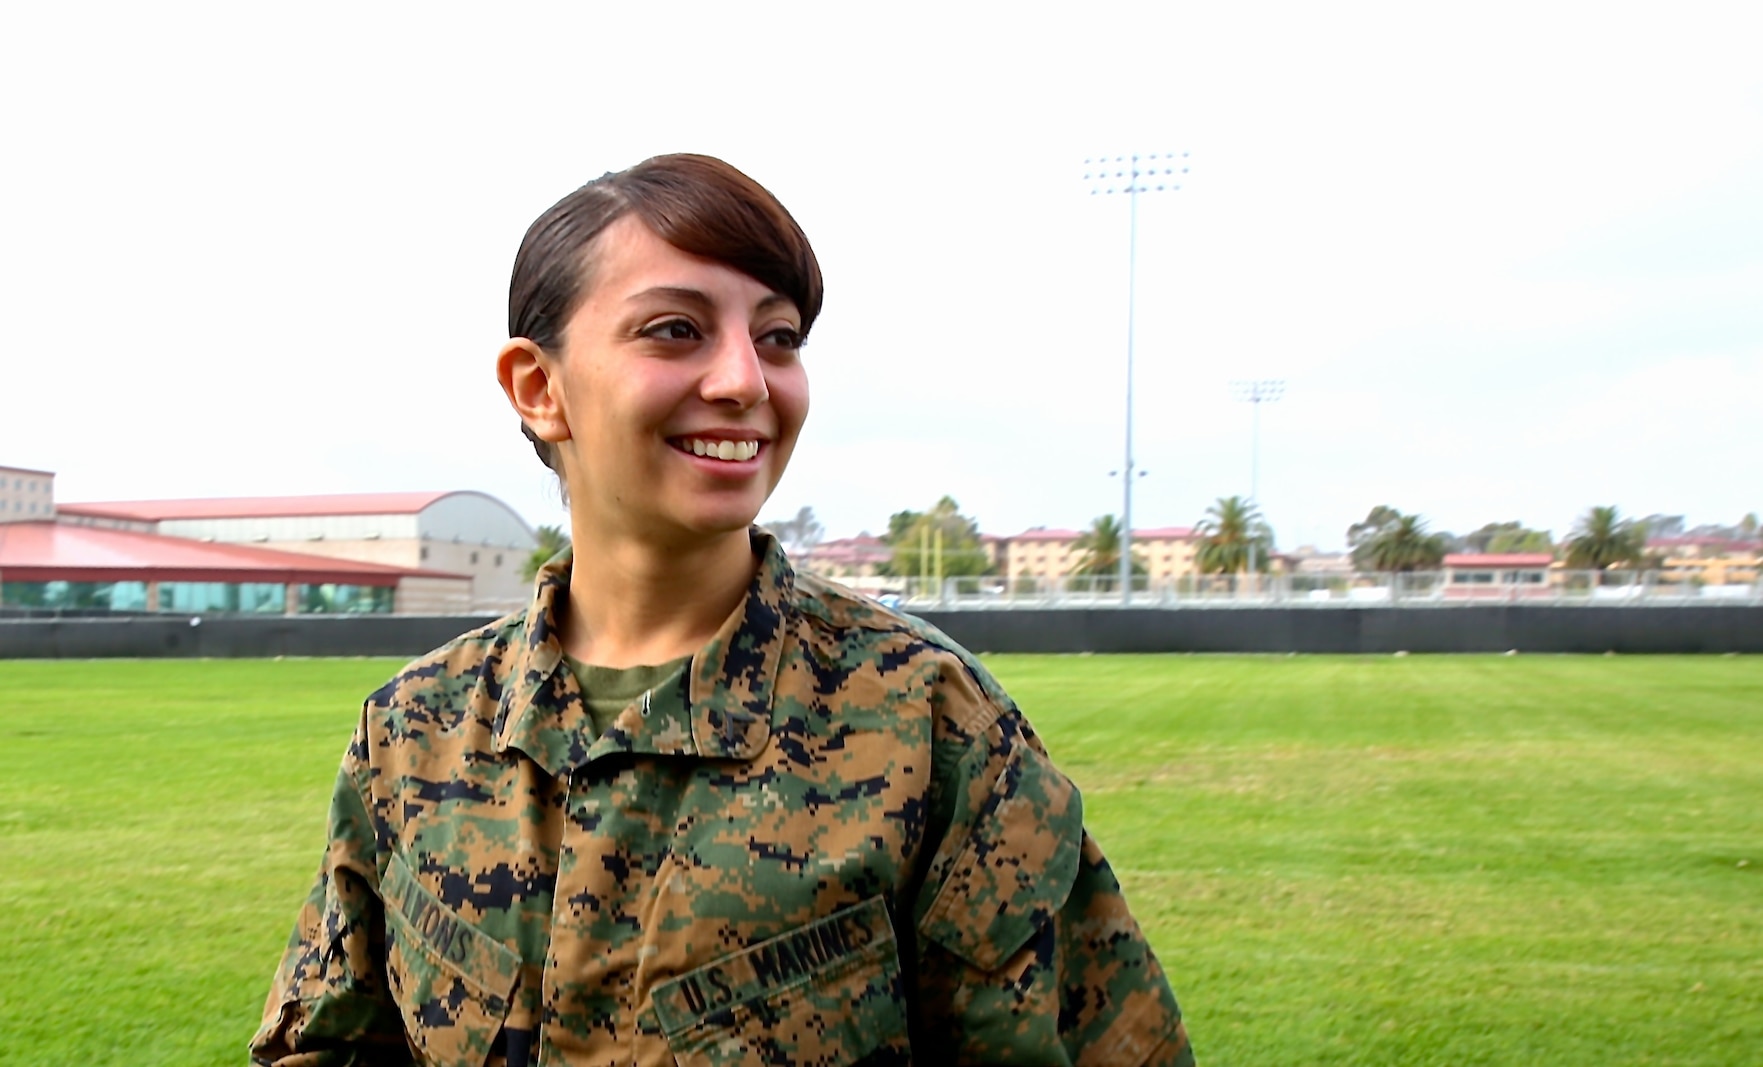 Even as a young child Lance Cpl. Senora Lyons, knew exactly what she wanted to do when she grew up. The now 20-year-old administrative specialist for Headquarters Regiment, 1st Marine Logistics Group found the same motivation in the Marine Corps as she did developing her talent in music. Despite the detour, she is committed to achieving her childhood dream.